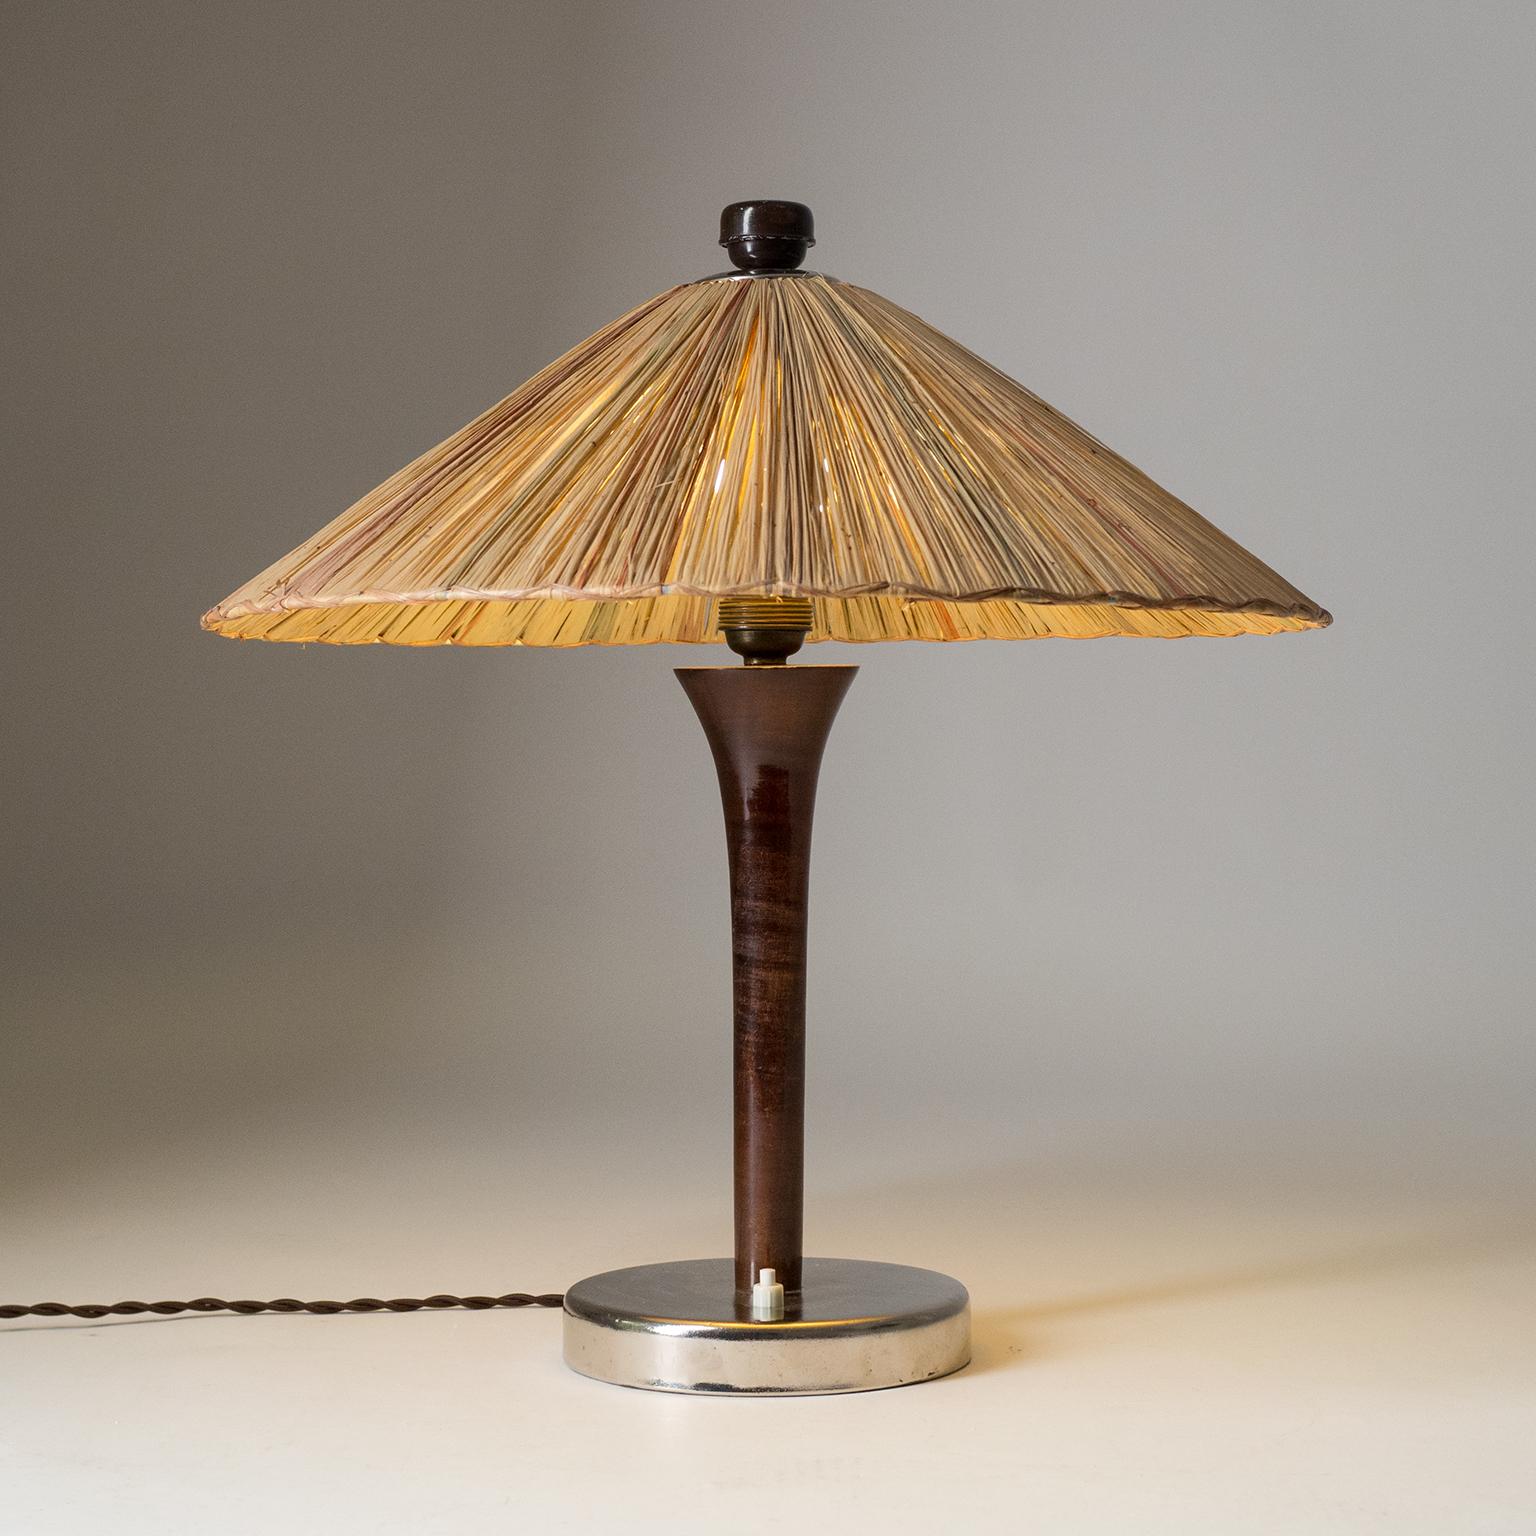 German Art Deco Table Lamp, 1930s, with Original Straw Shade